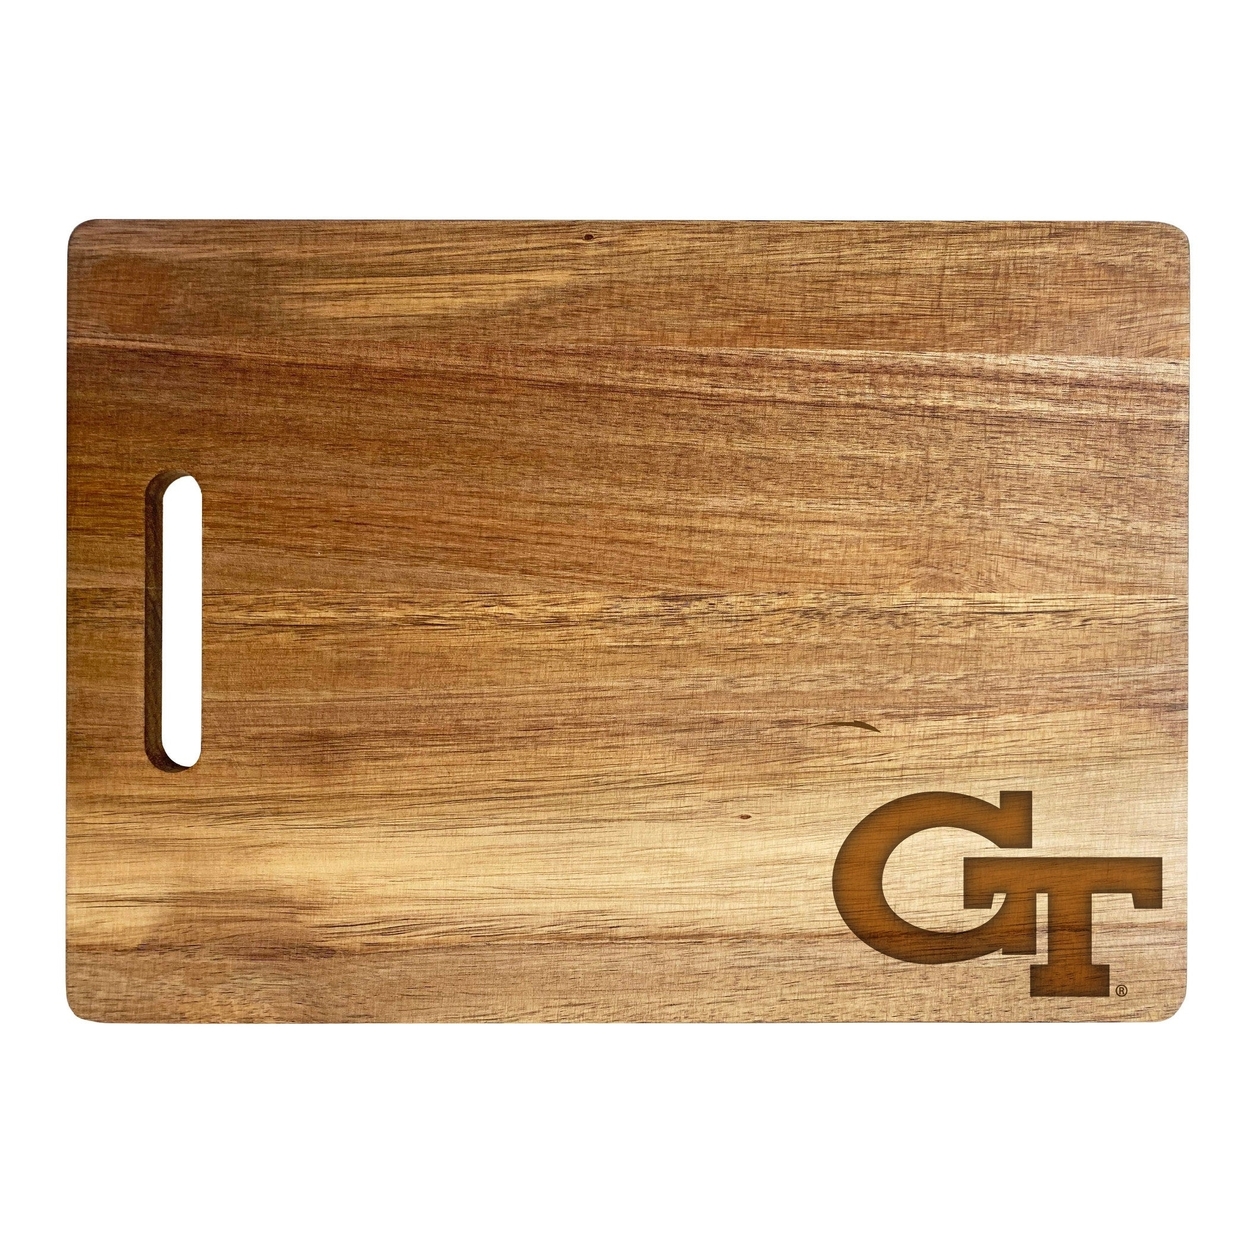 Georgia Tech Yellow Jackets Engraved Wooden Cutting Board 10 X 14 Acacia Wood - Small Engraving